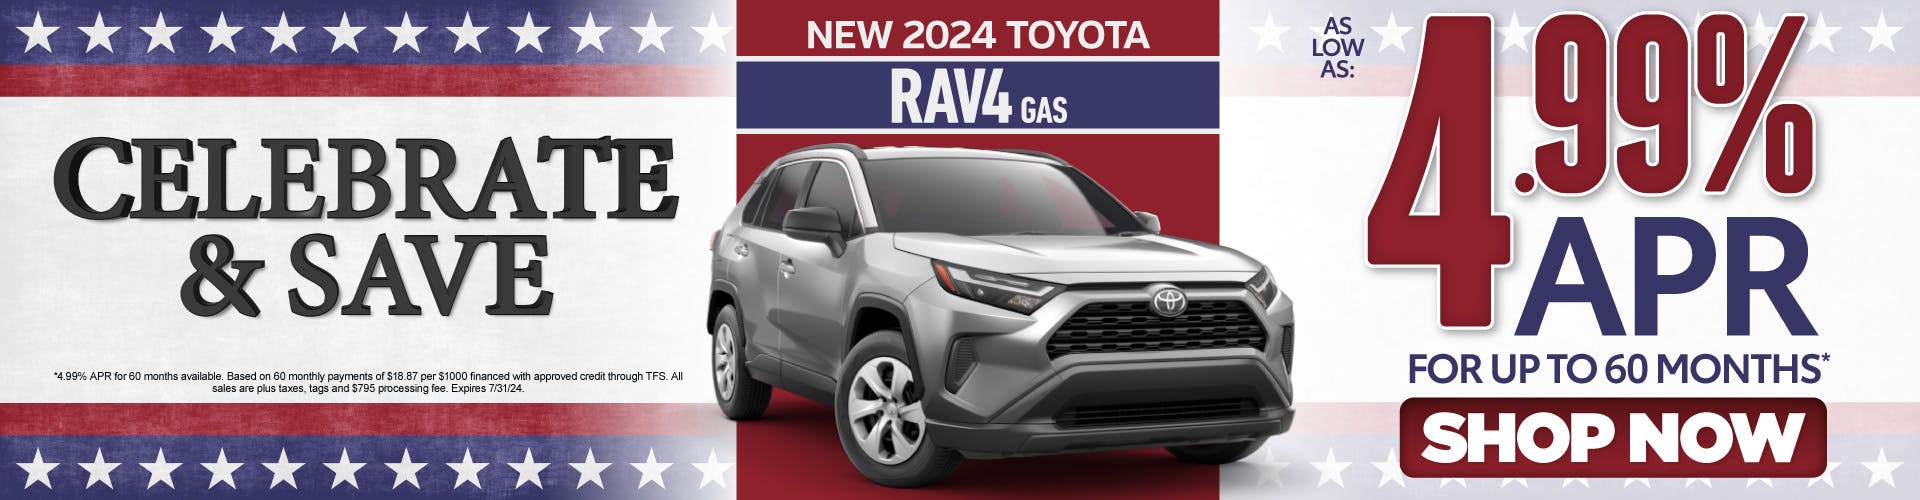 New 2024 Toyota RAV4 Gas – As Low as 4.99% APR for up to 60 months* – Act Now